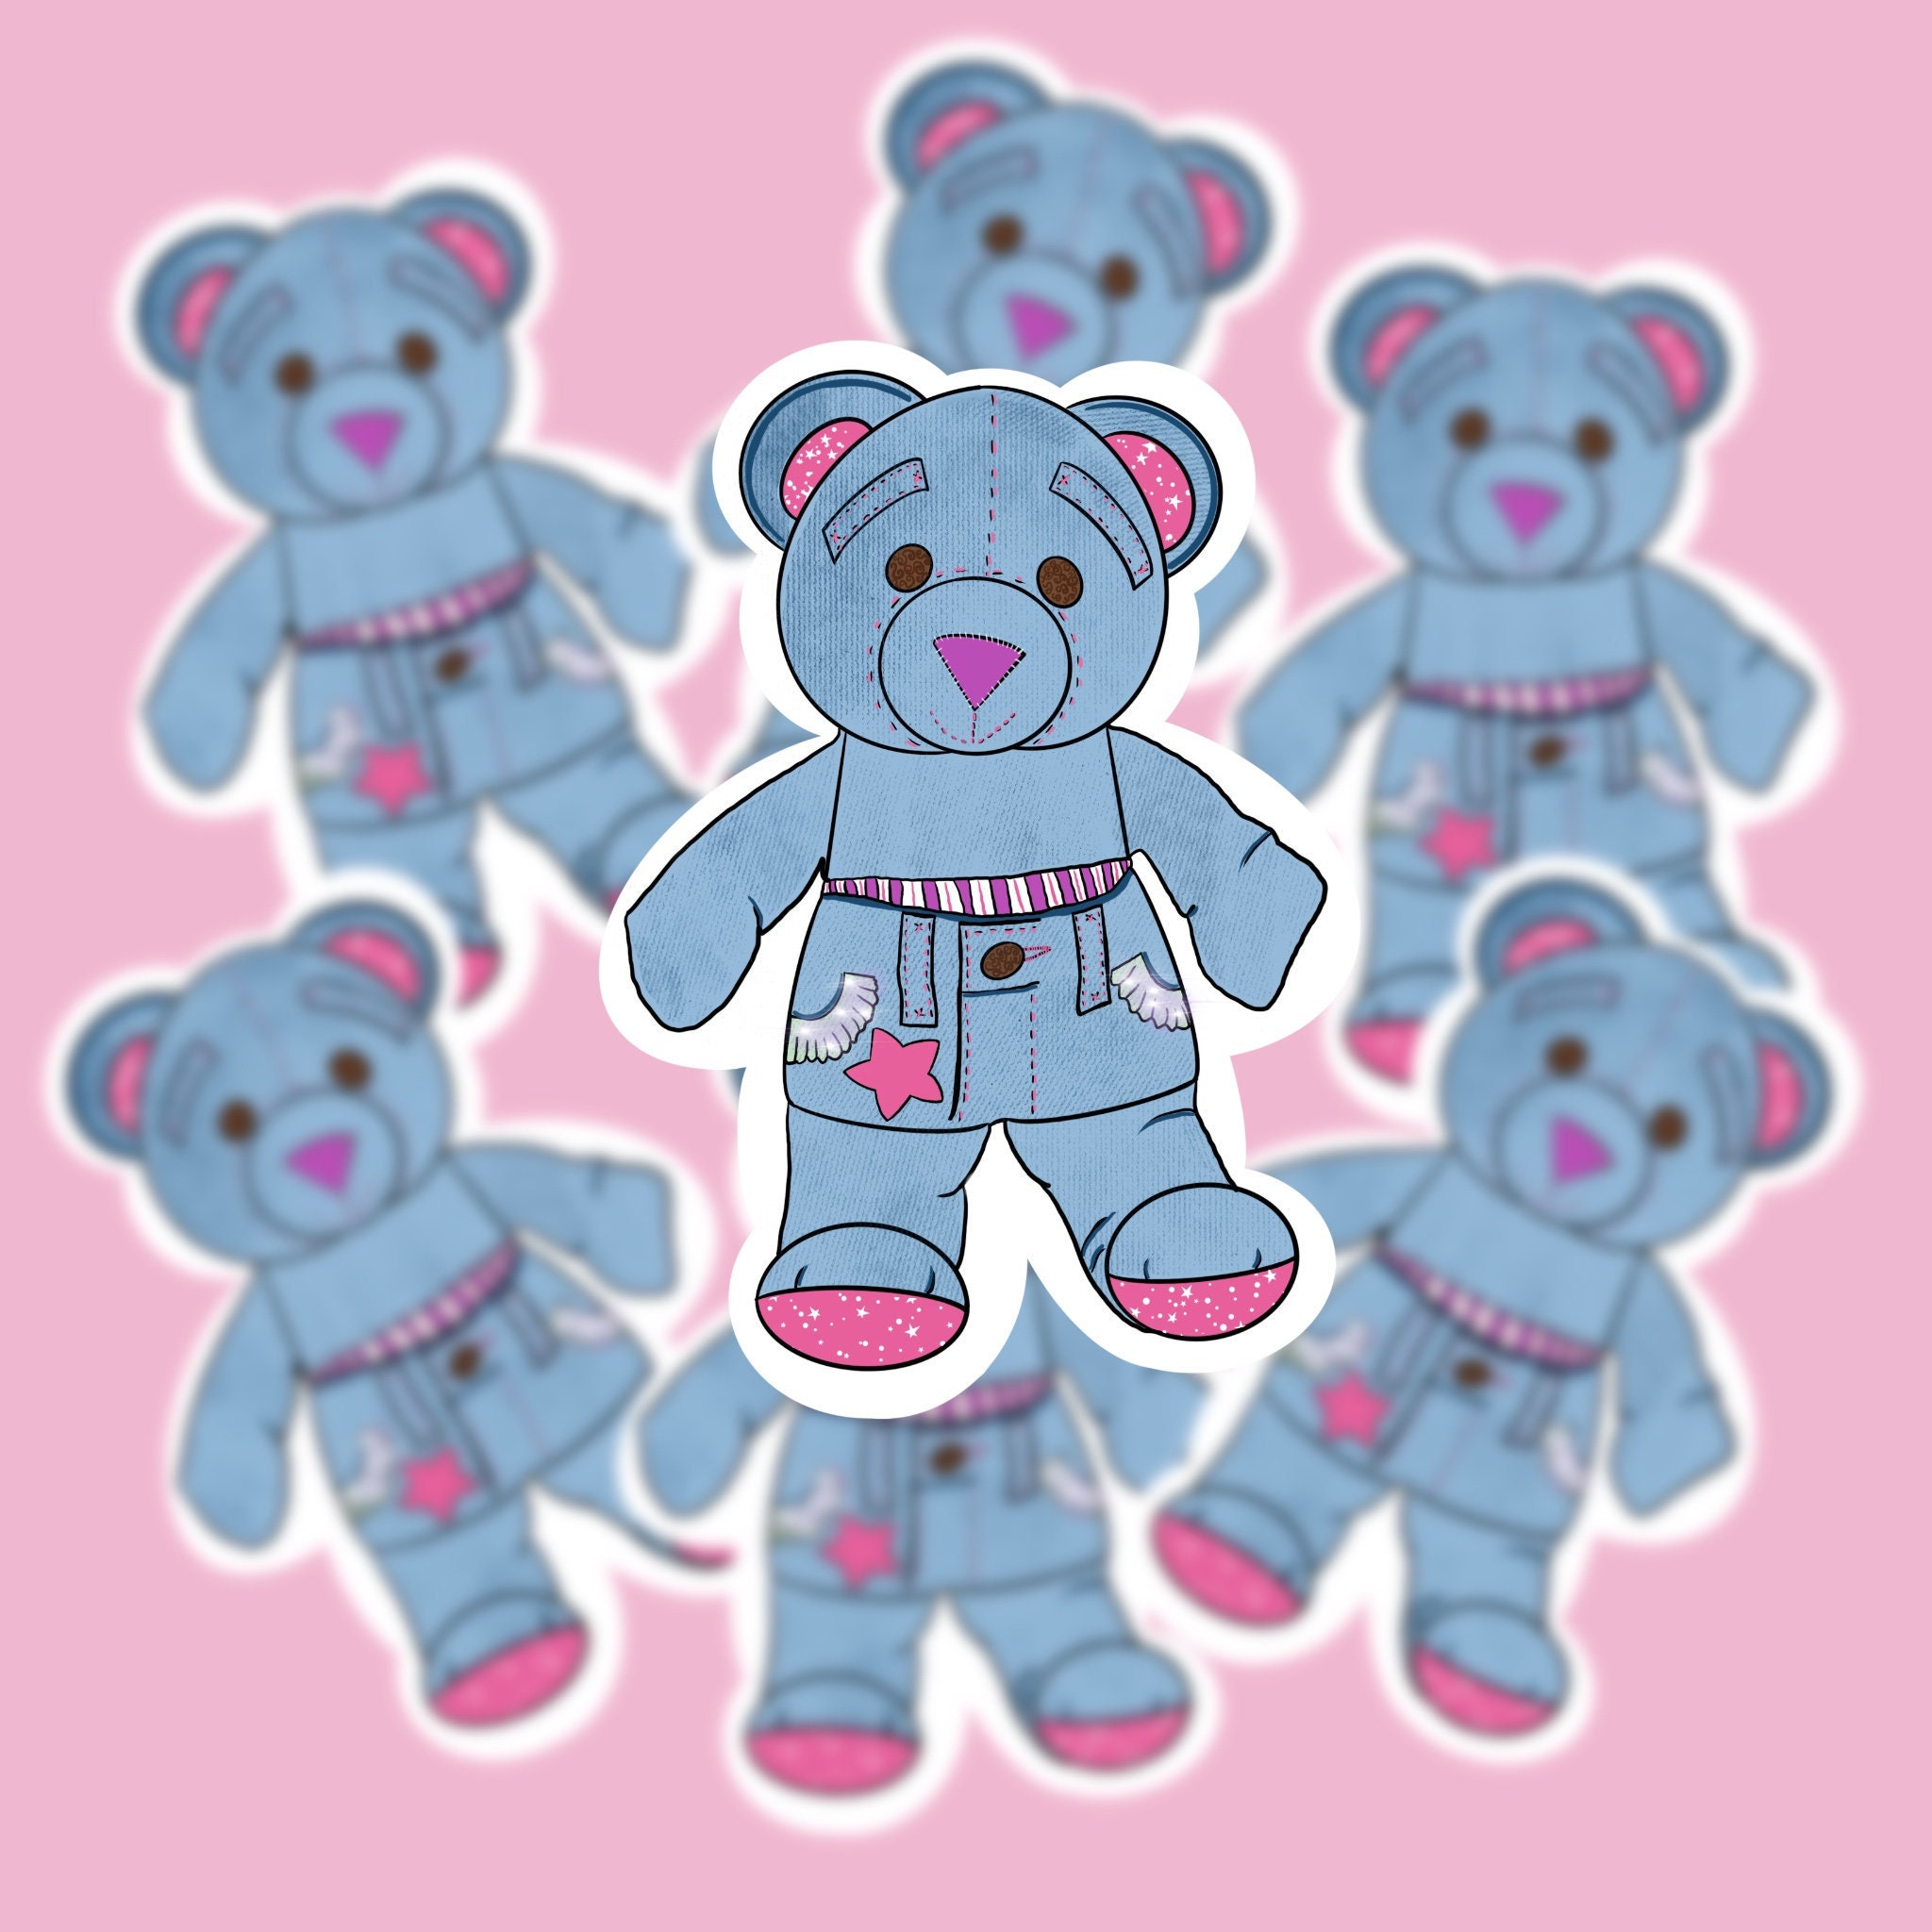 90's Tyco Doodle Bear Sticker 90s aesthetic 90s girl stickers 90s throwback  stickers 90s kids 90s childhood toys Gift for her 90s love